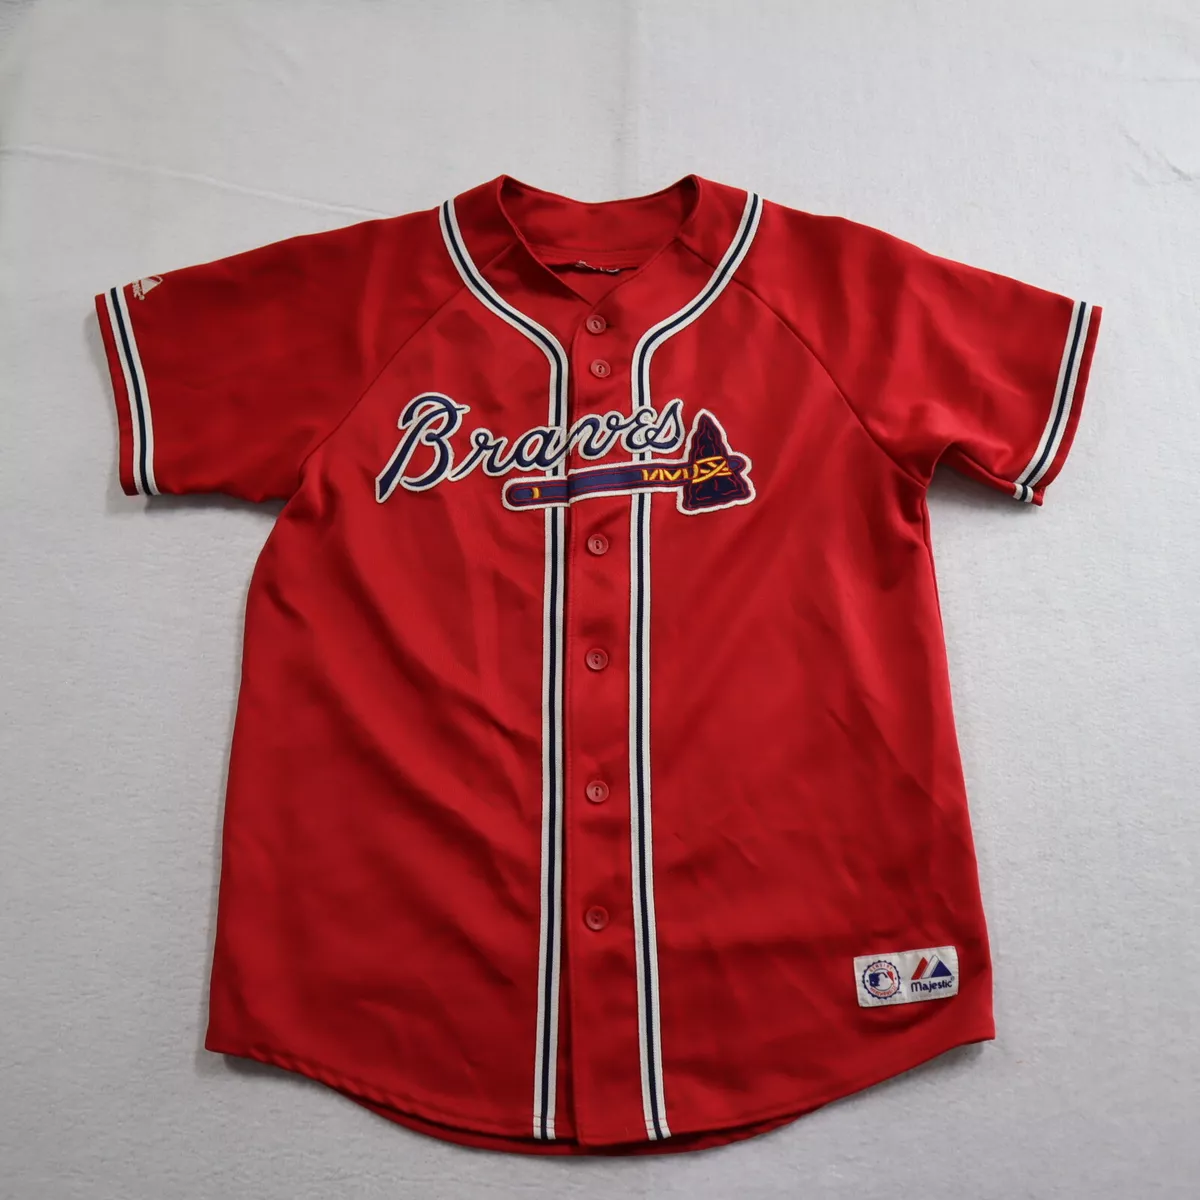 Majestic Adult Size Atlanta Braves Red Button Up Jersey w/ 2 Autographs  Read